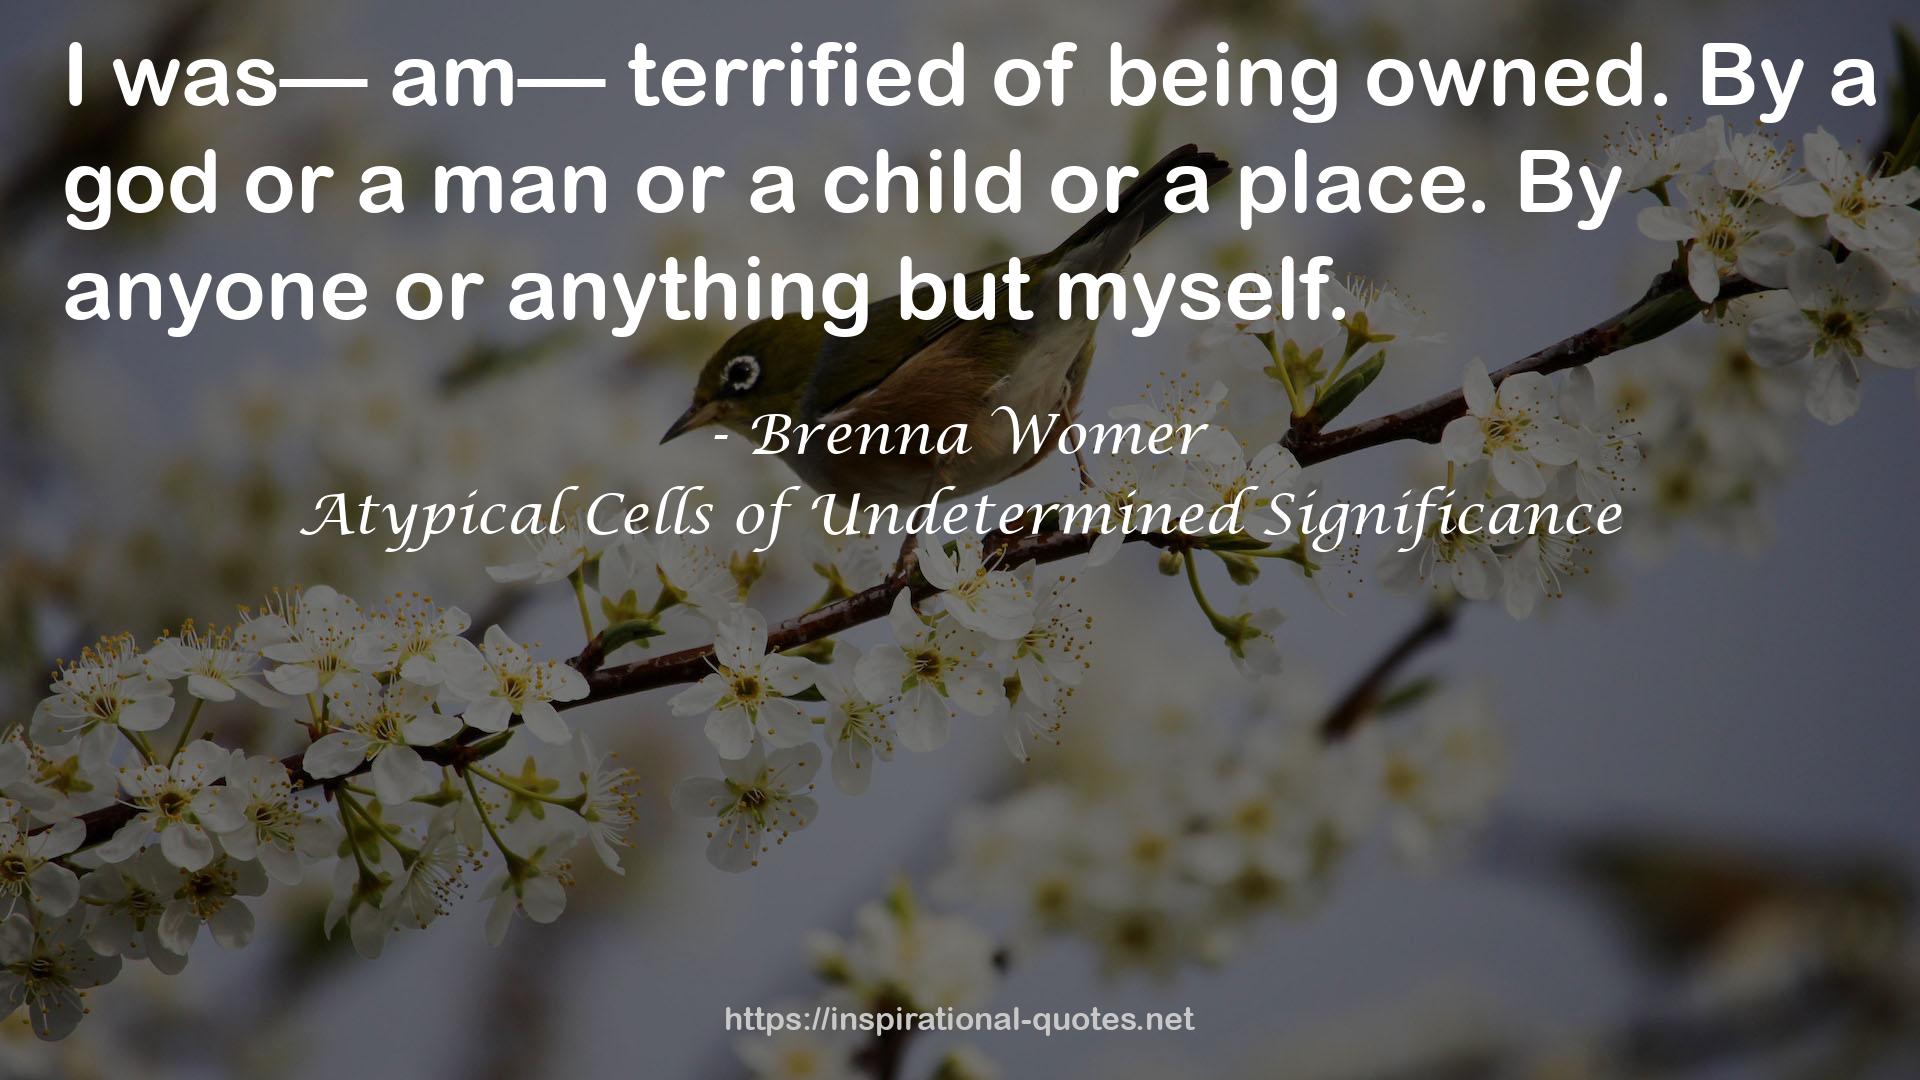 Brenna Womer QUOTES